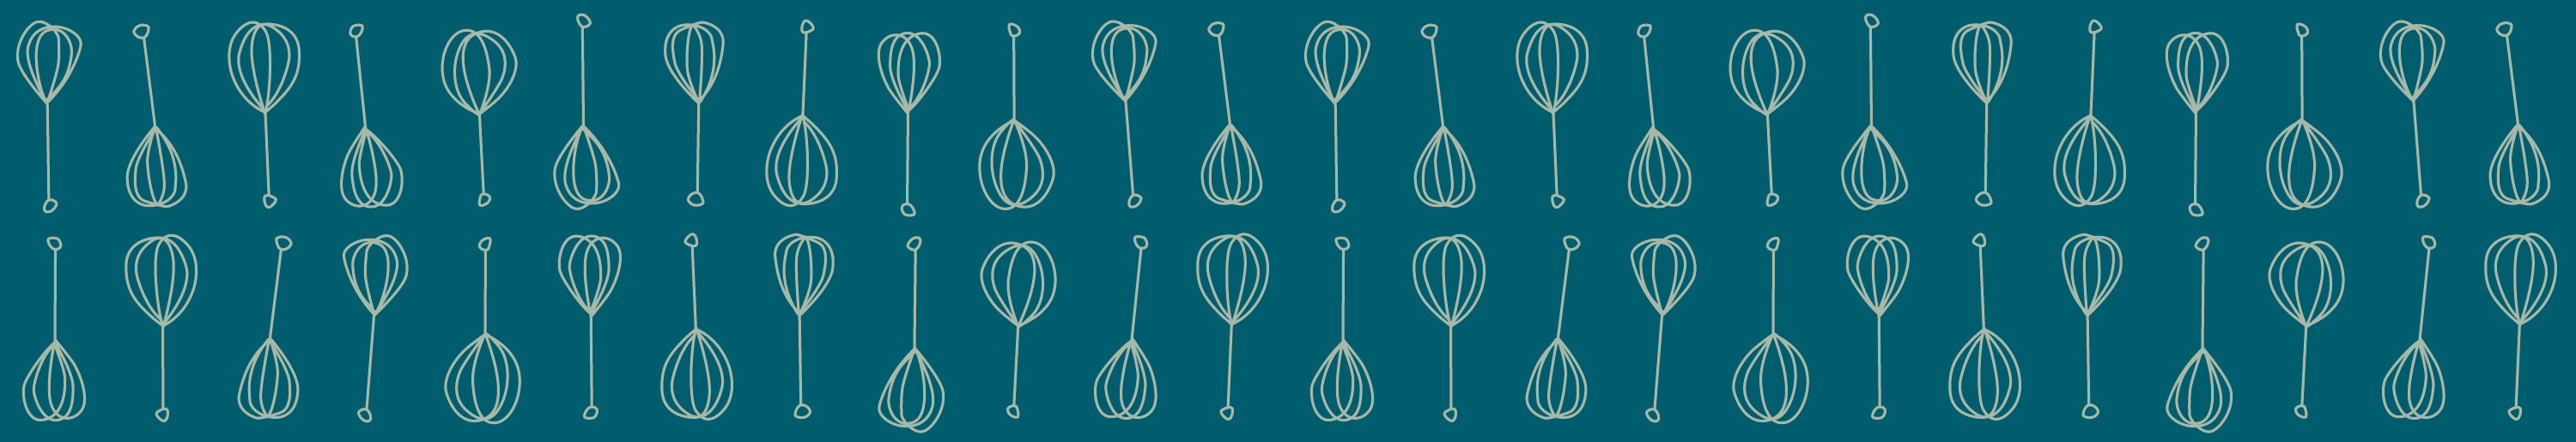 a pattern of illustrated whisks